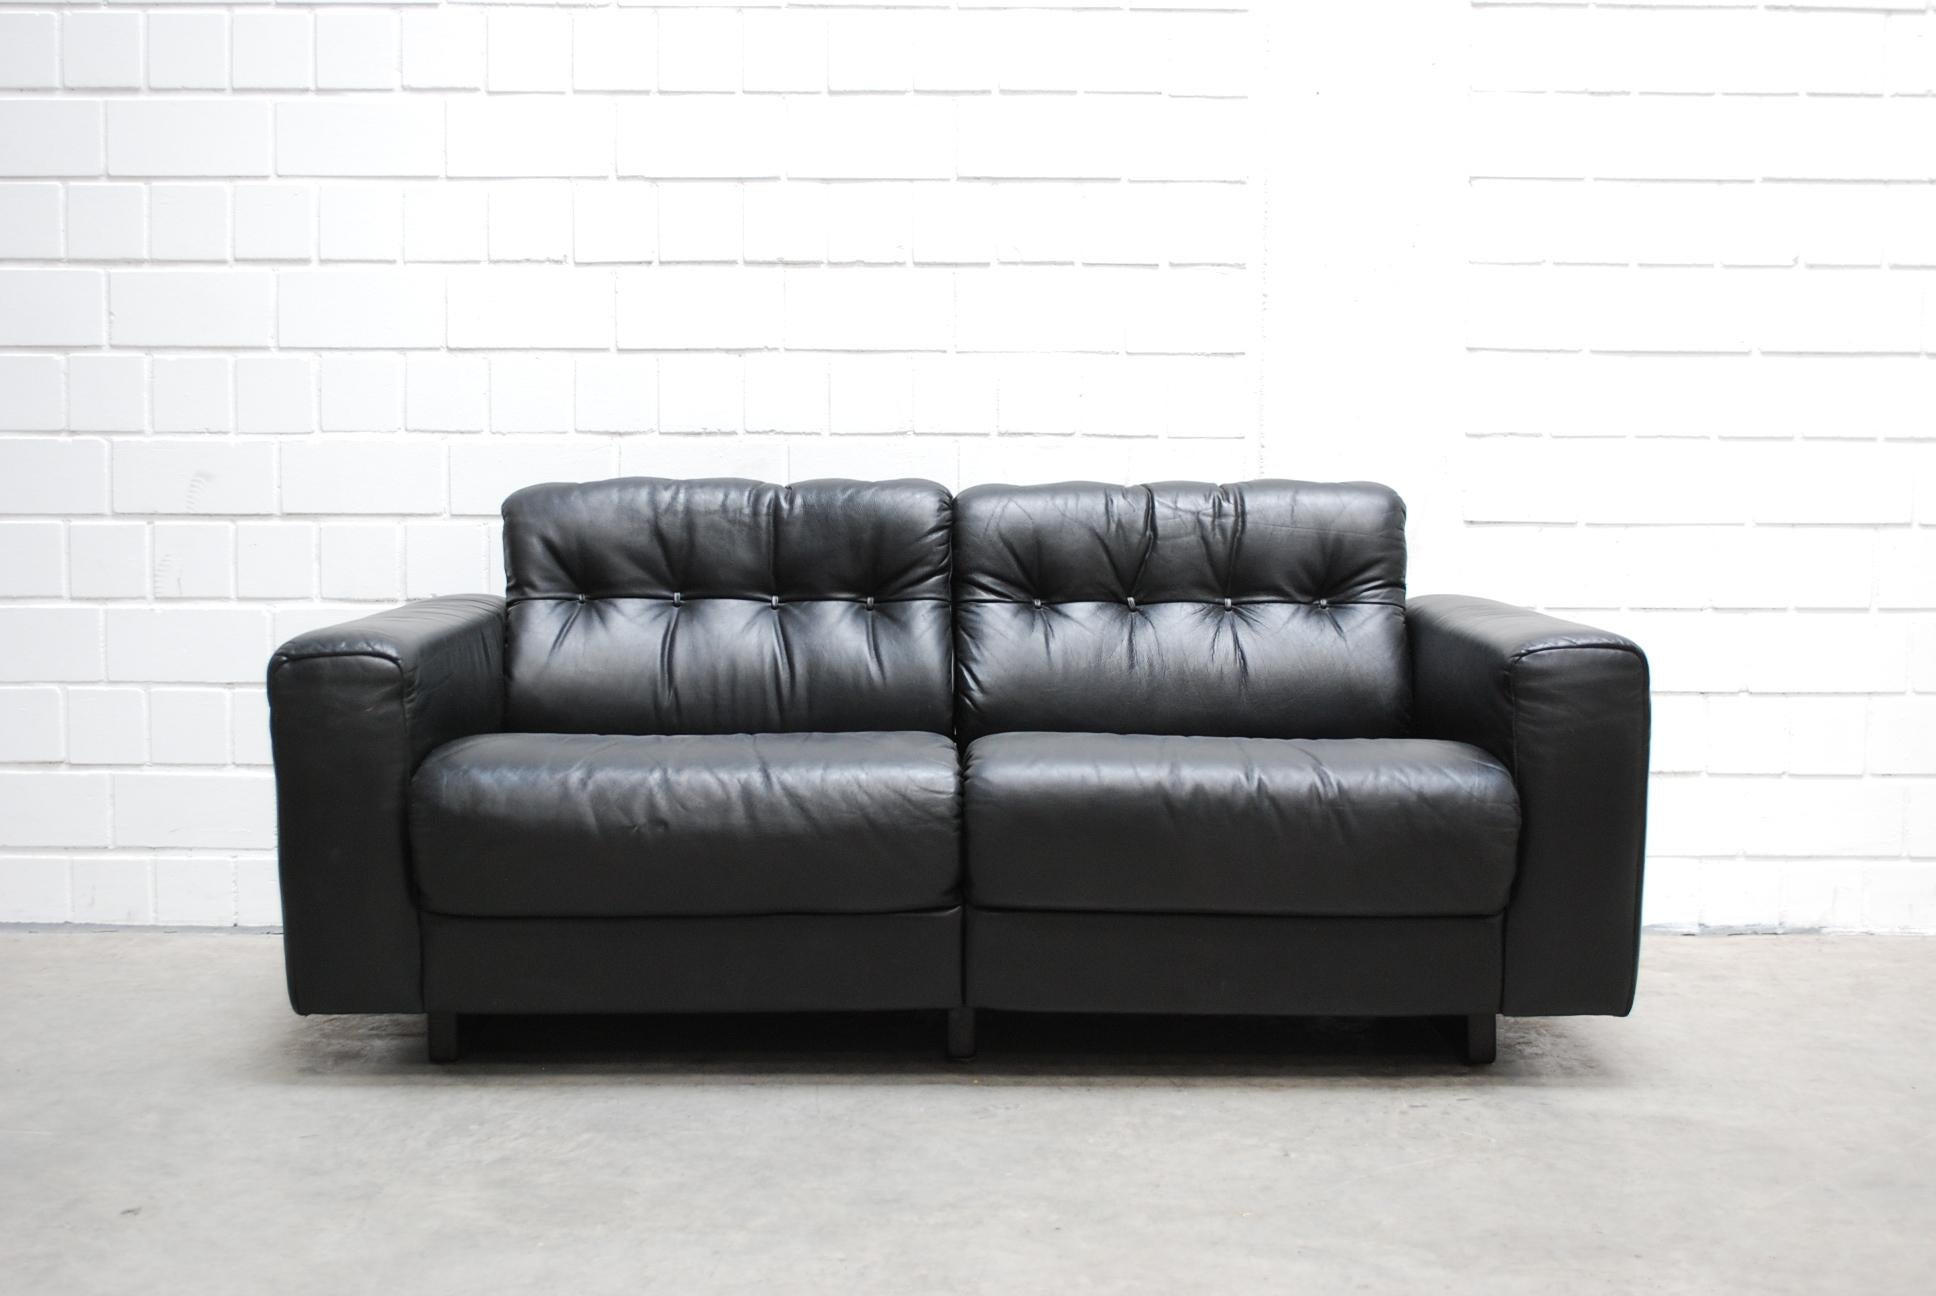 De Sede DS 40 black leather sofa from 1970.
Soft comfort.
Great 1970s design.
 
 